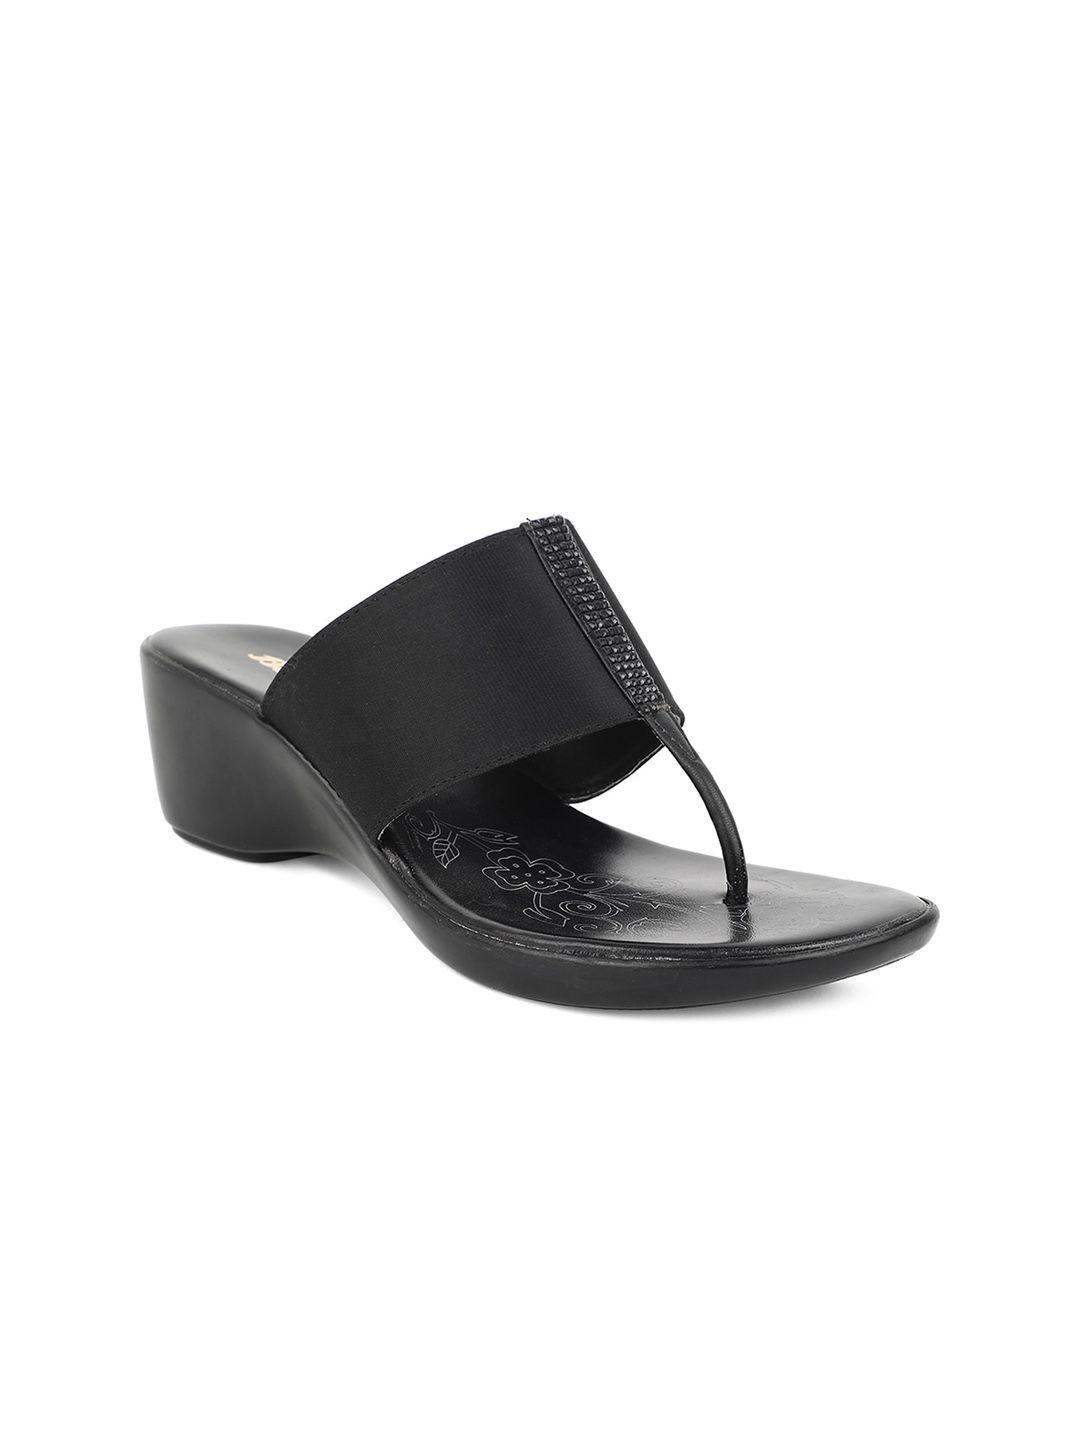 bata black embellished wedge mules with laser cuts